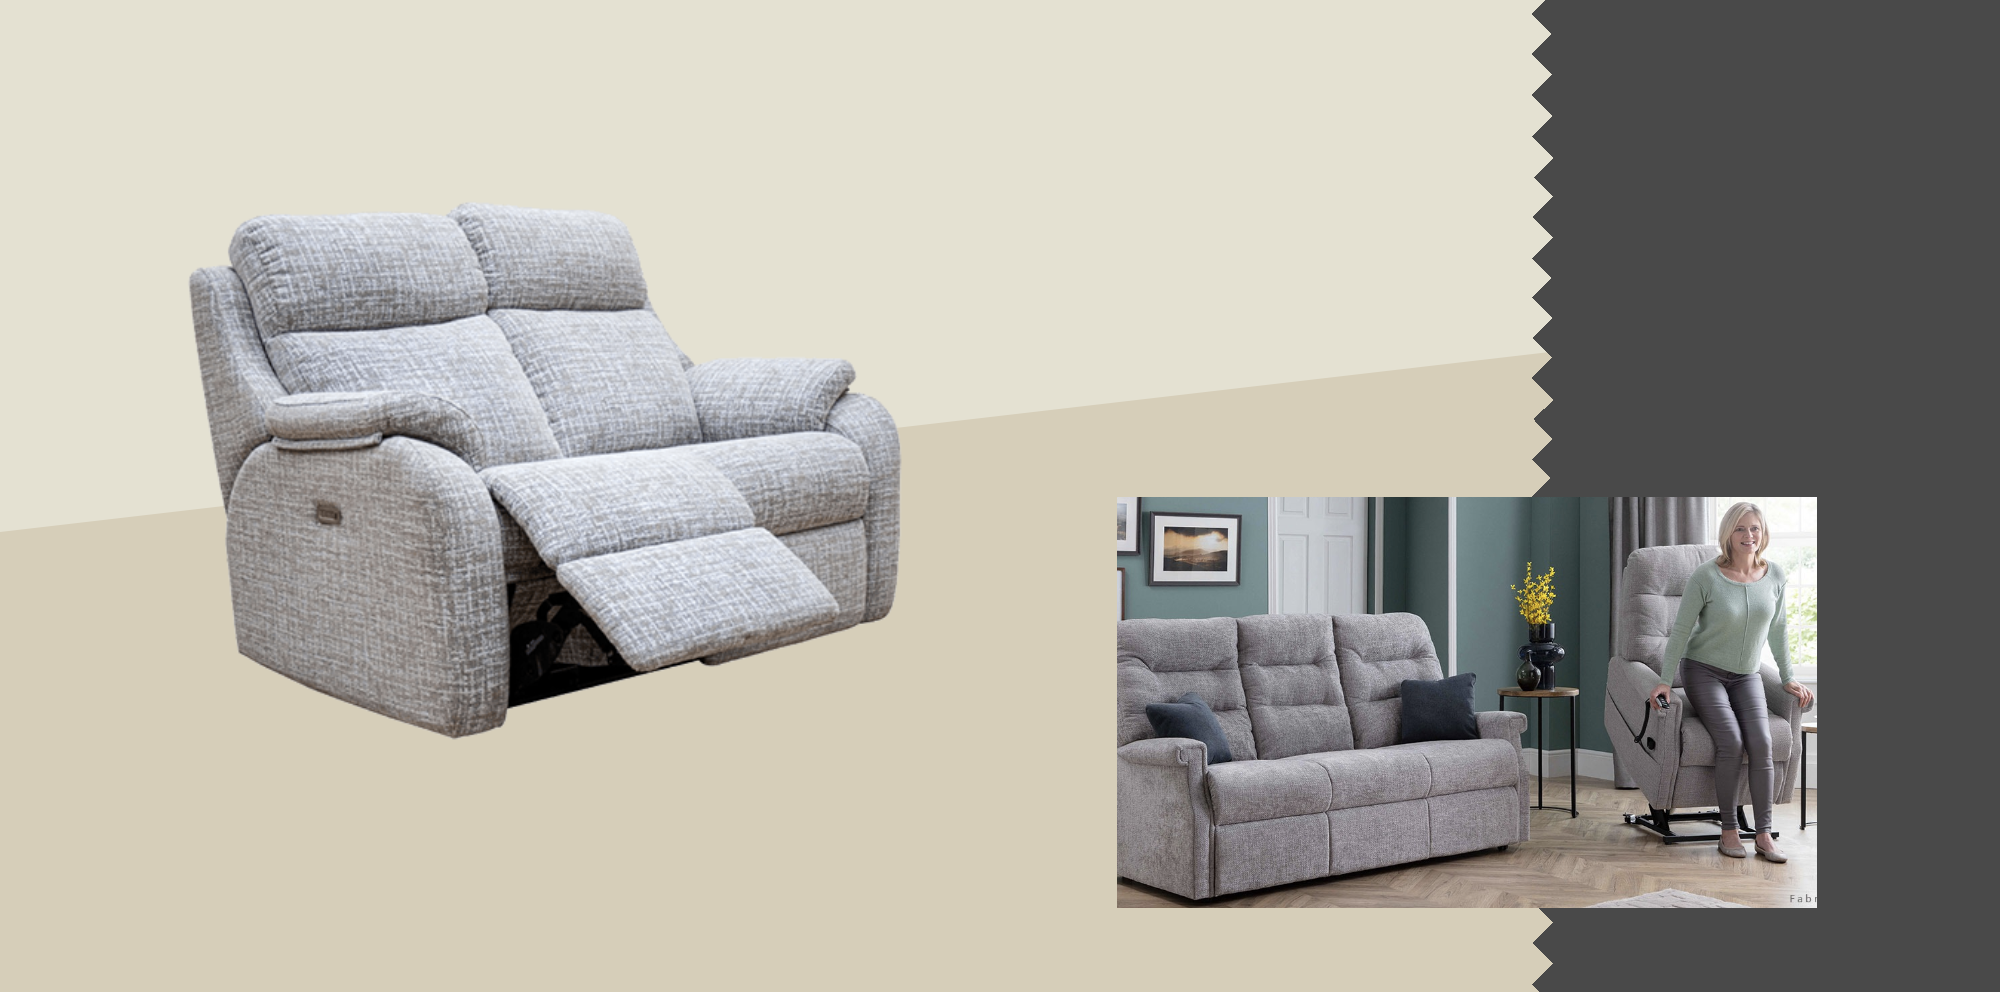 Fabric 2 Seater Manual Recliner Sofas